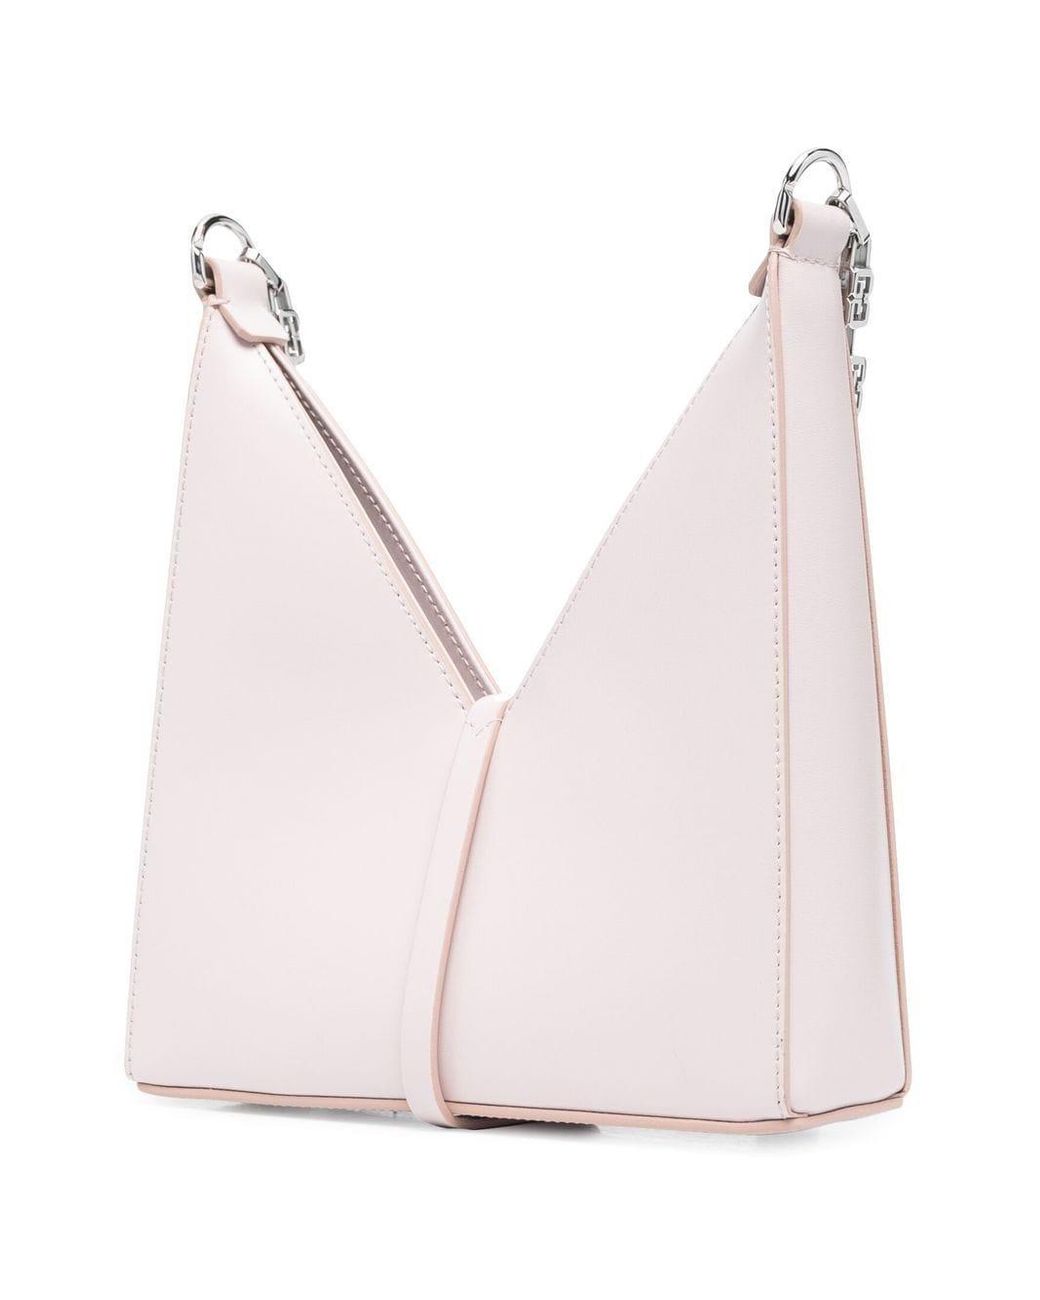 Givenchy Small Cut Out Shoulder Bag in Pink | Lyst